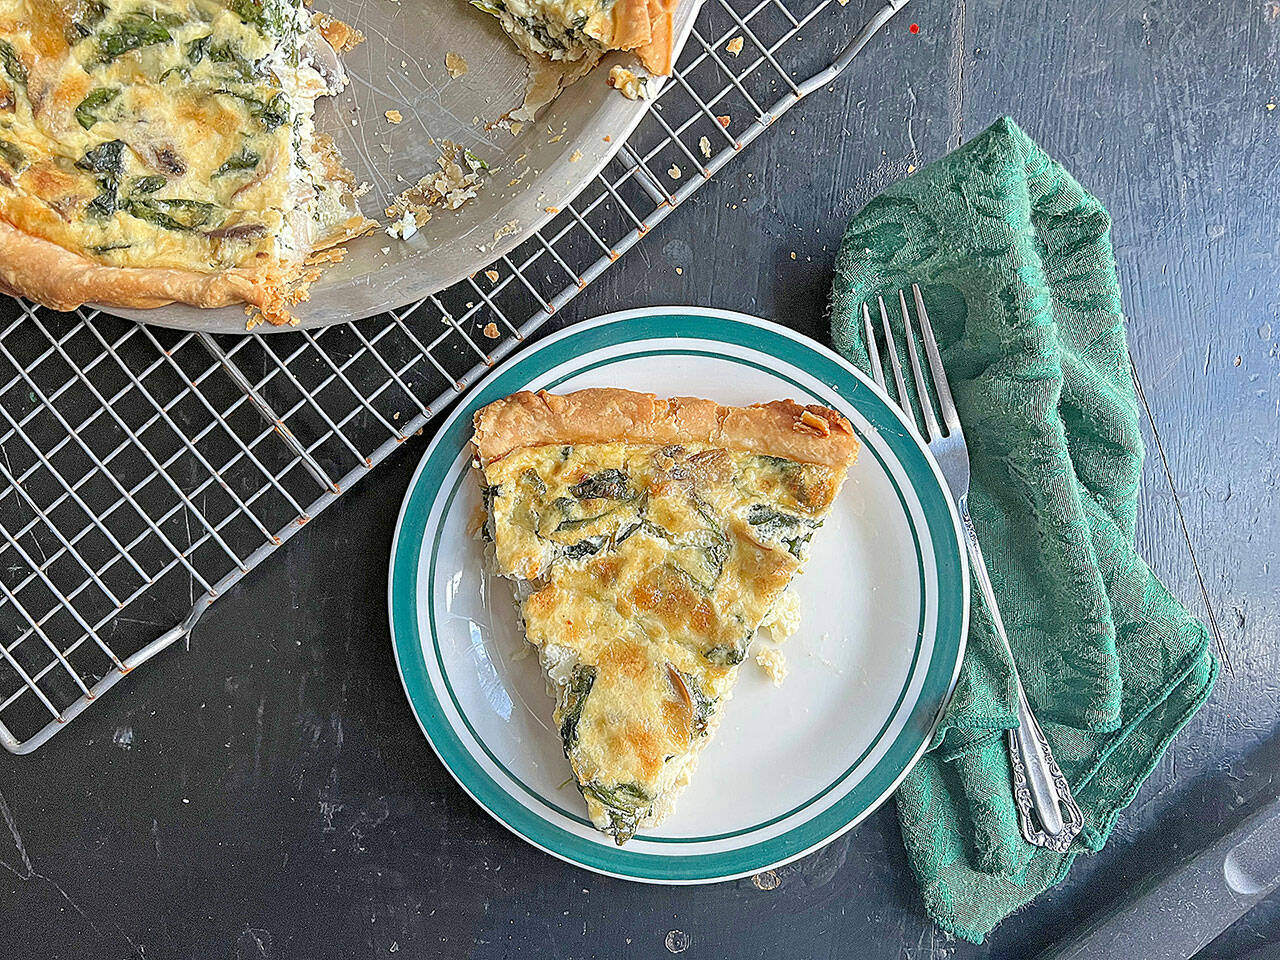 This easy-to-make spinach and mushroom quiche is perfect for a light dinner or fancy brunch. (Gretchen McKay / Pittsburgh Post-Gazette)